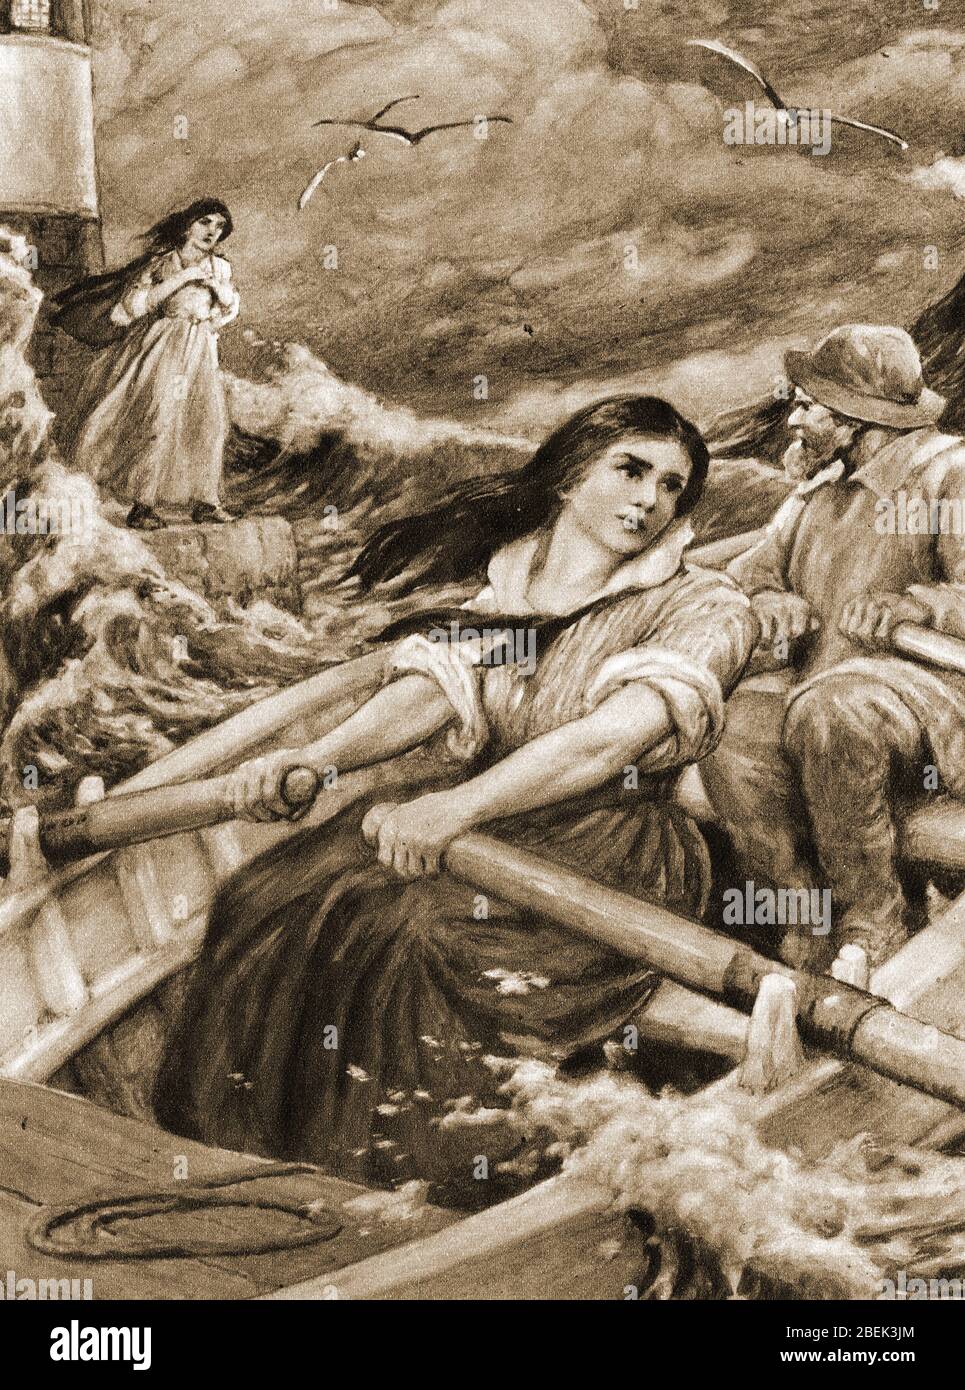 1920  Artist's impression - Grace Horsley Darling (1815-1842)  and her father rescuing the survivors from the wreck of the steamer 'Forfarshire'. Grace Darling was an English lighthouse keeper's daughter. who with her father William used a rowing boat to rescue 9 survivors (of a total of  62 people) from the shipwrecked Forfarshire in 1838.   The paddle steamer ran aground on the Farne Islands off the coast of  Northumberland under conditions that were so bad a lifeboat rescue was difficult to attempt. The 23 year old and her father achieved national fame.She died of tuberculosis in 1842. Stock Photo